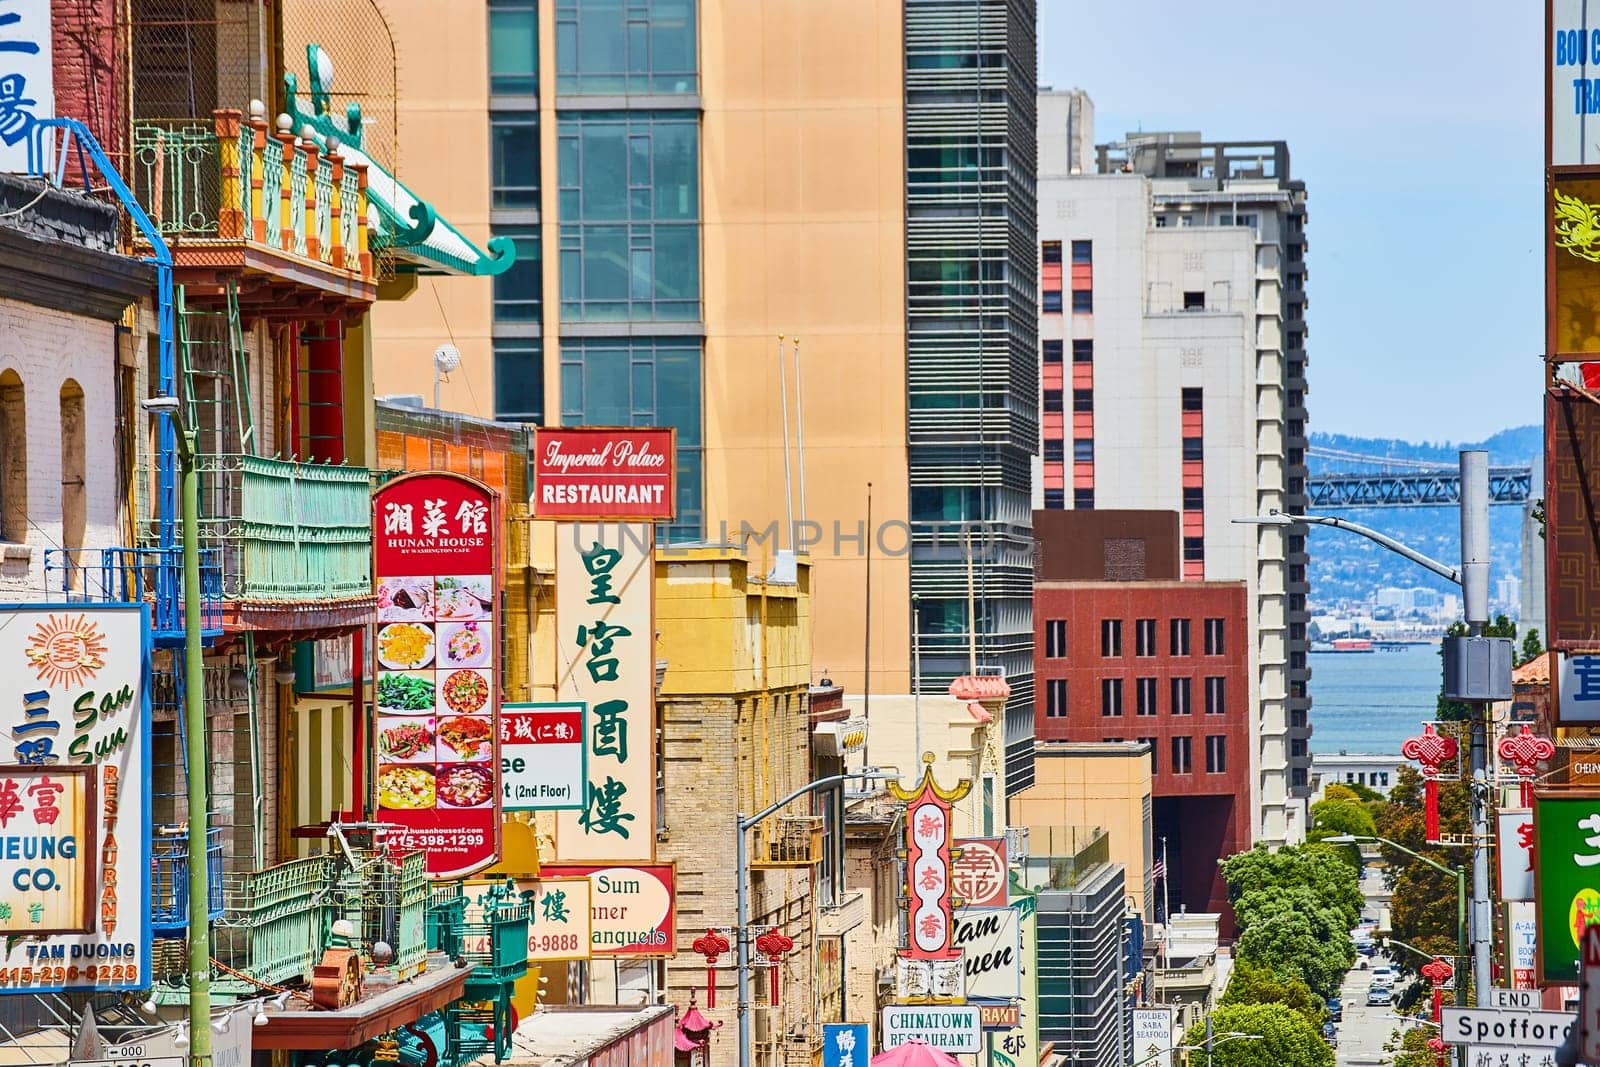 Image of Restaurants and shop signs in Chinese along California street leading to San Francisco Bay